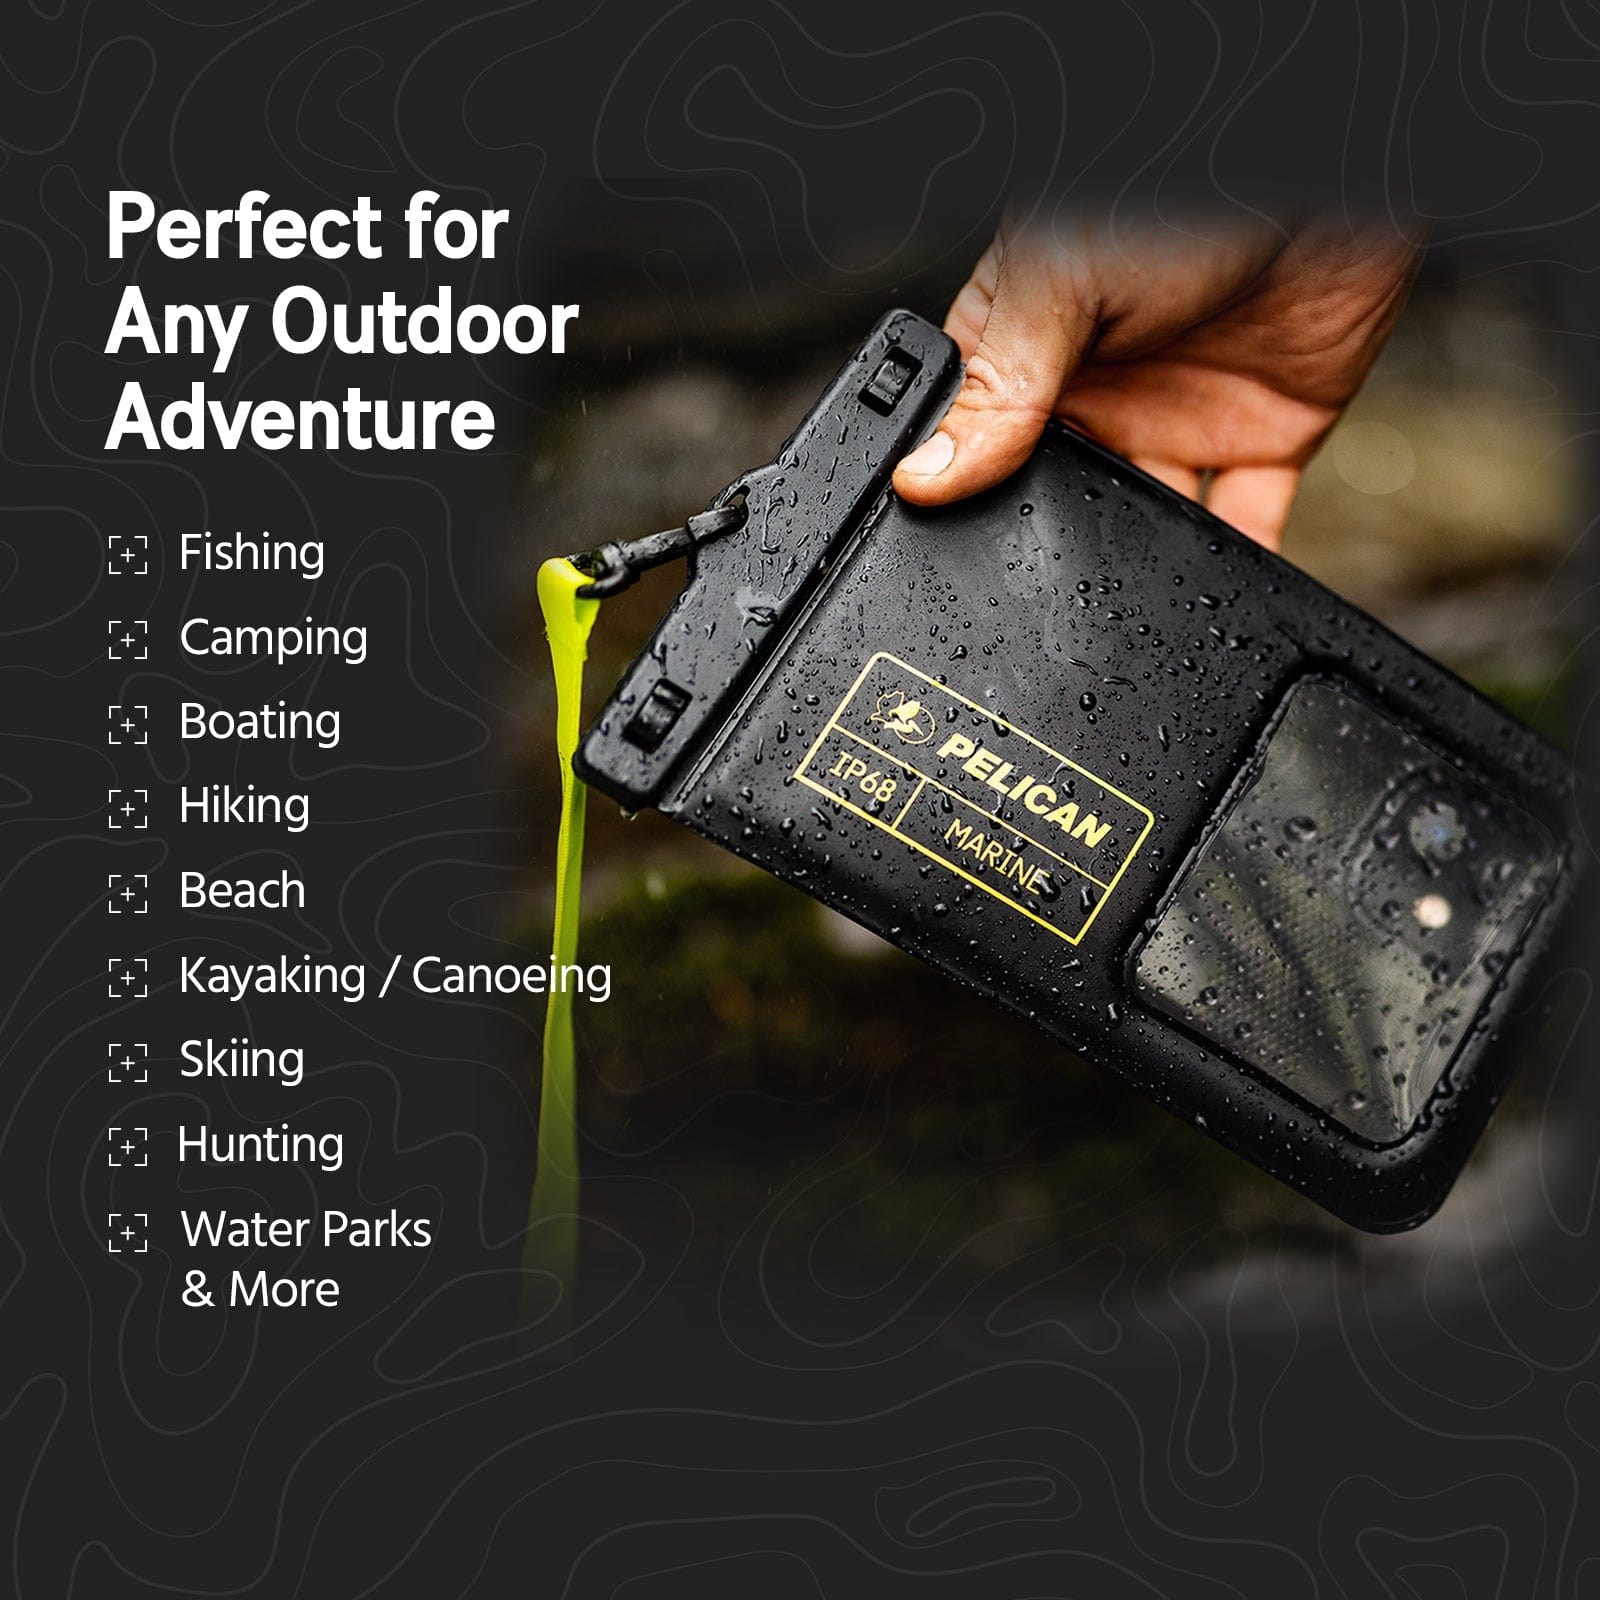 Perfect for any outdoor adventure. Fishing, camping, coating, hiking, beach, kayaking/ canoeing, skiing, hunting, water parks and more.